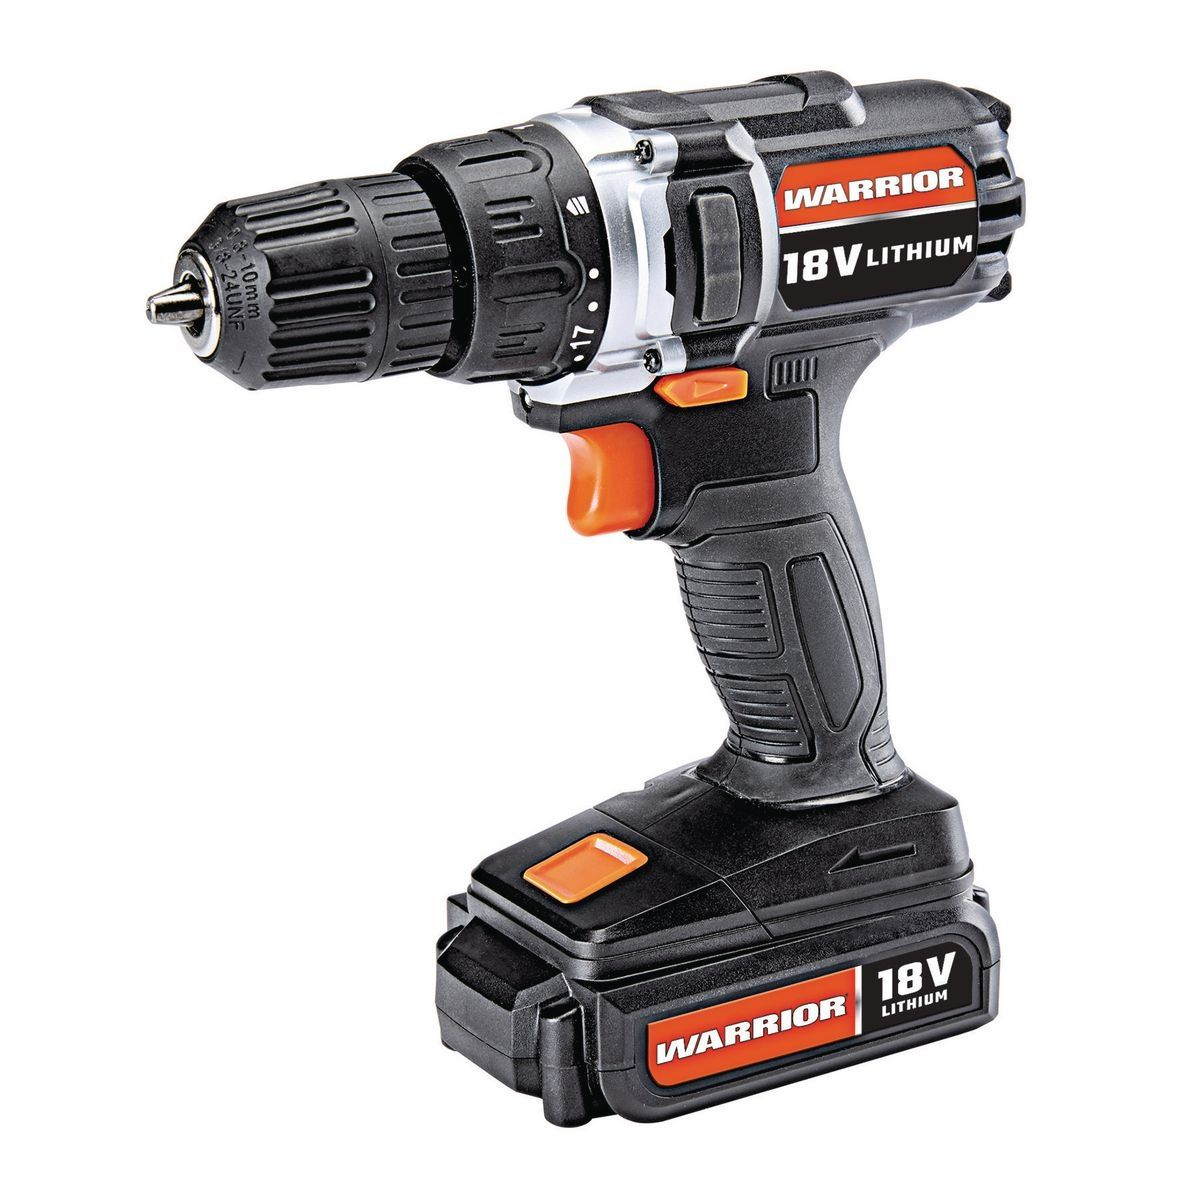 product photo of the Warrior 18V Cordless Drill sold at Harbor Freight